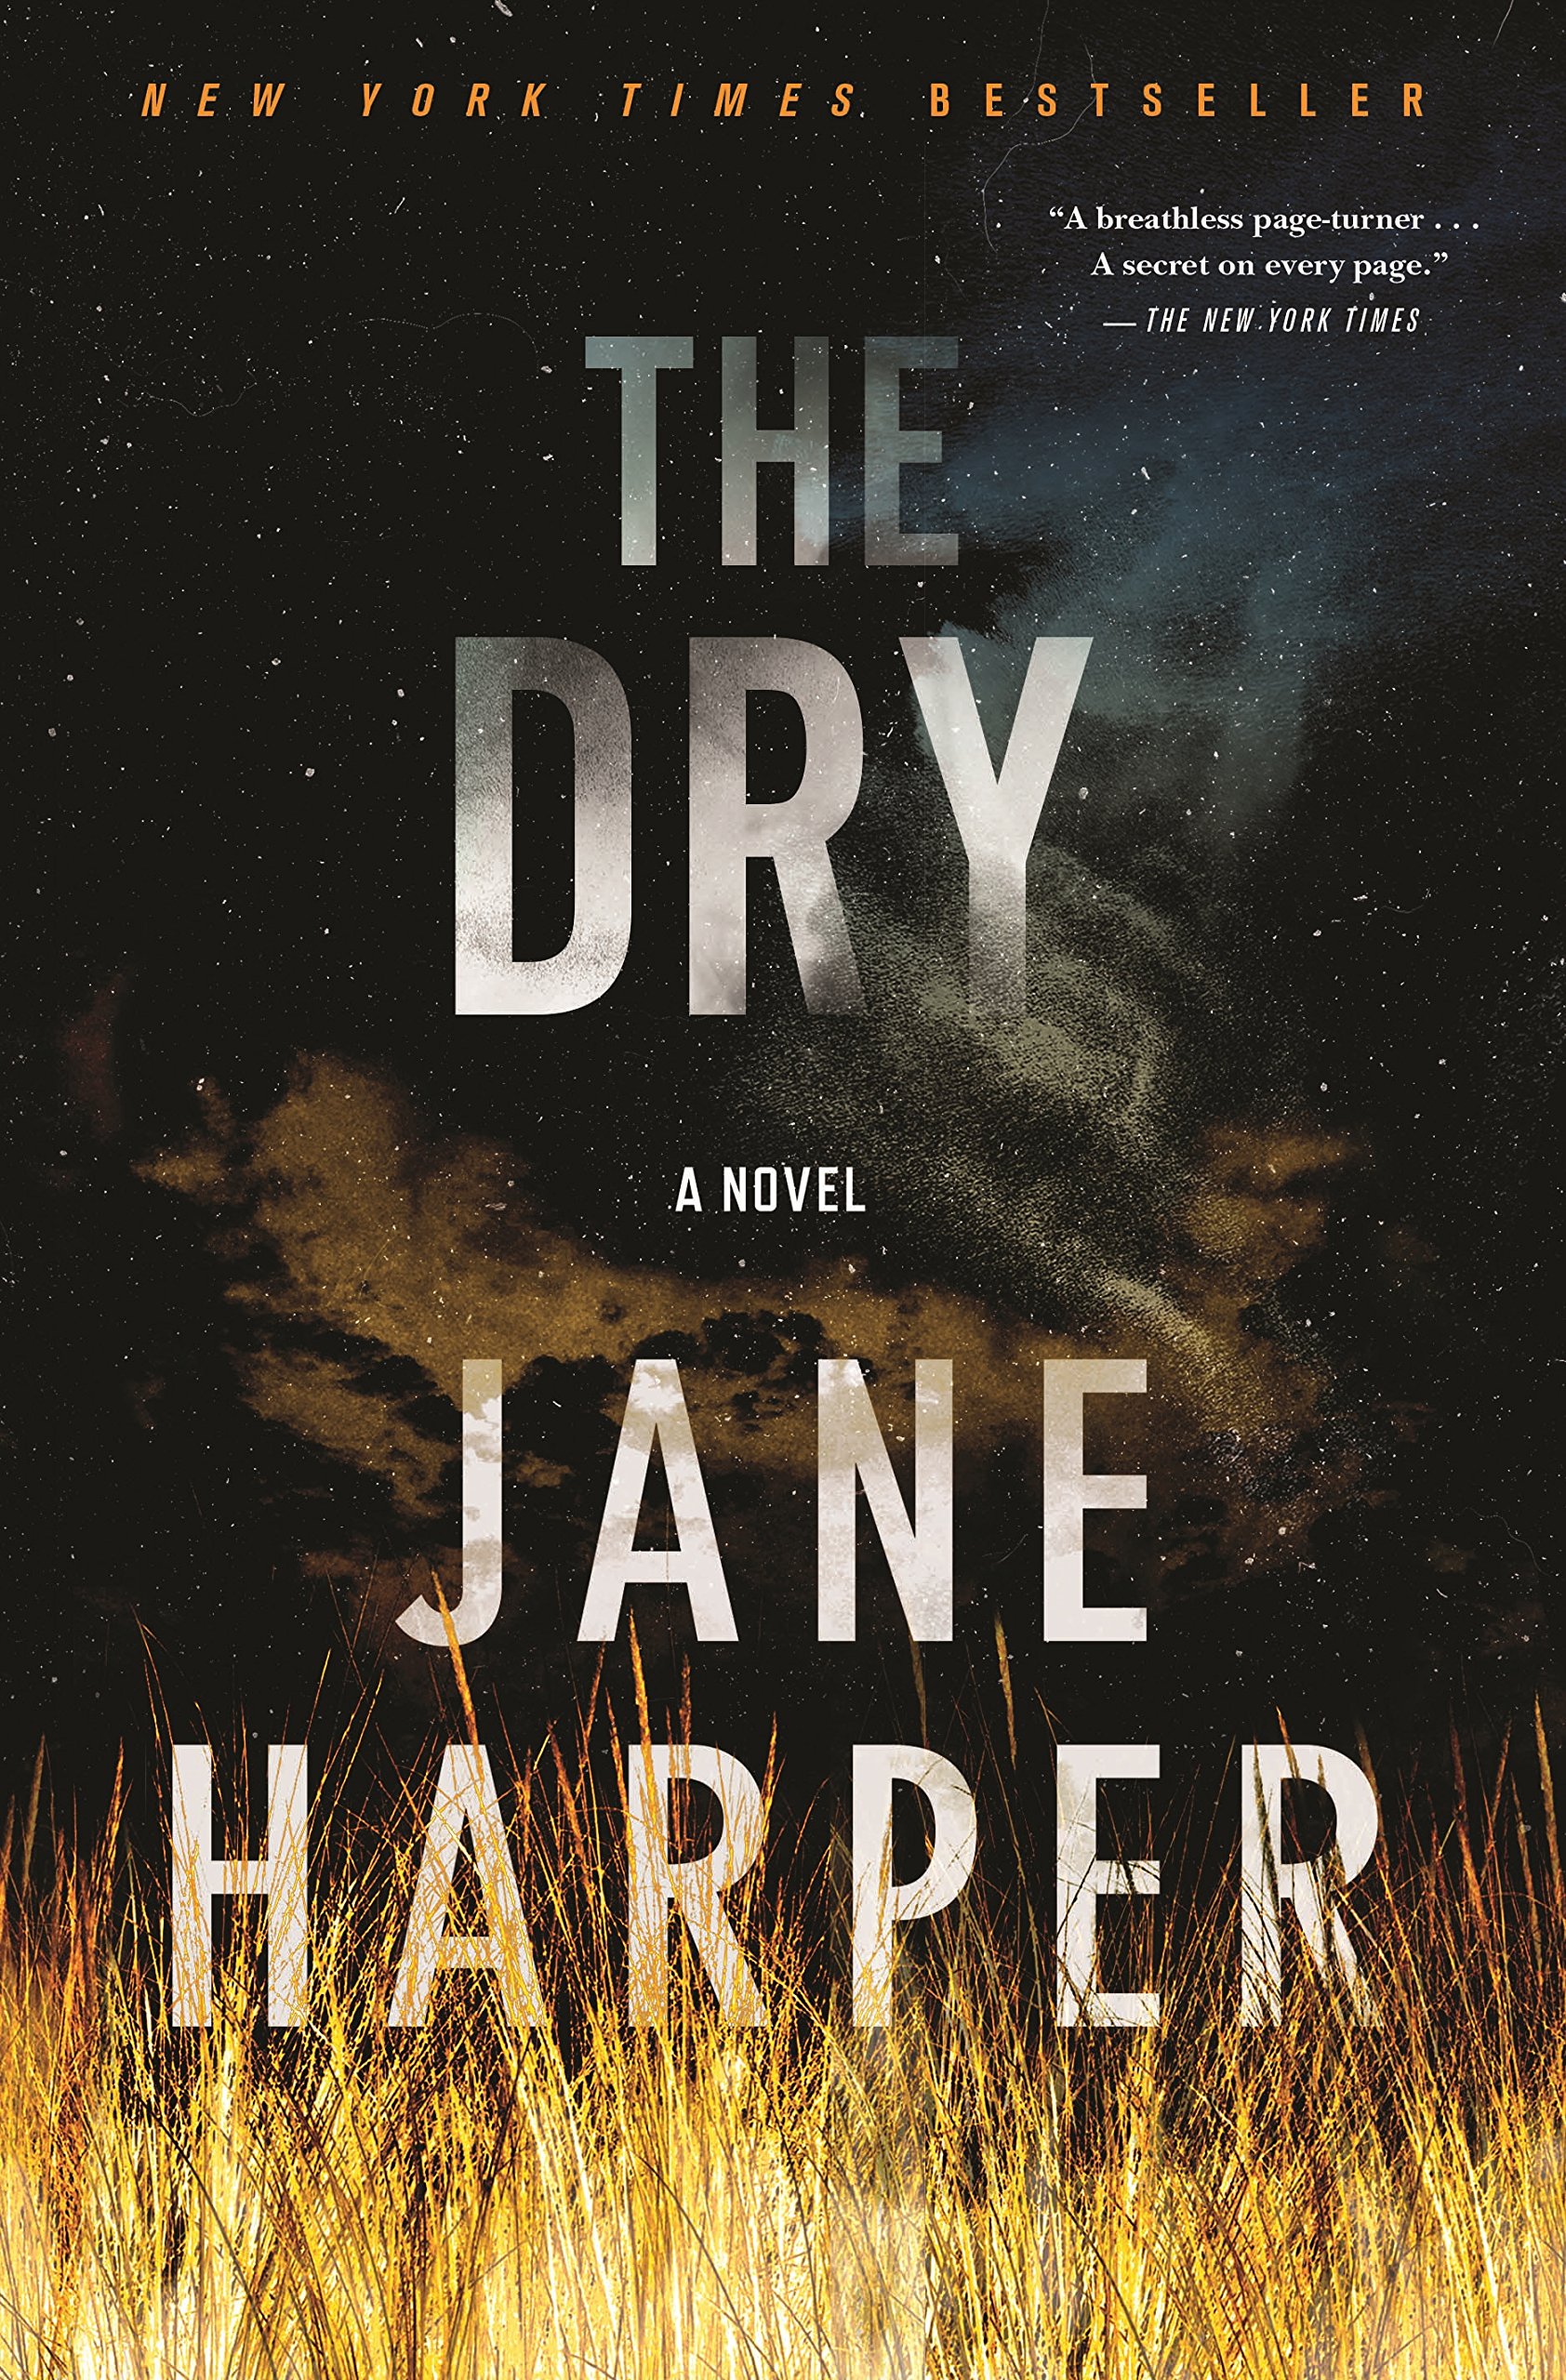 The Dry by Jane Harper book cover